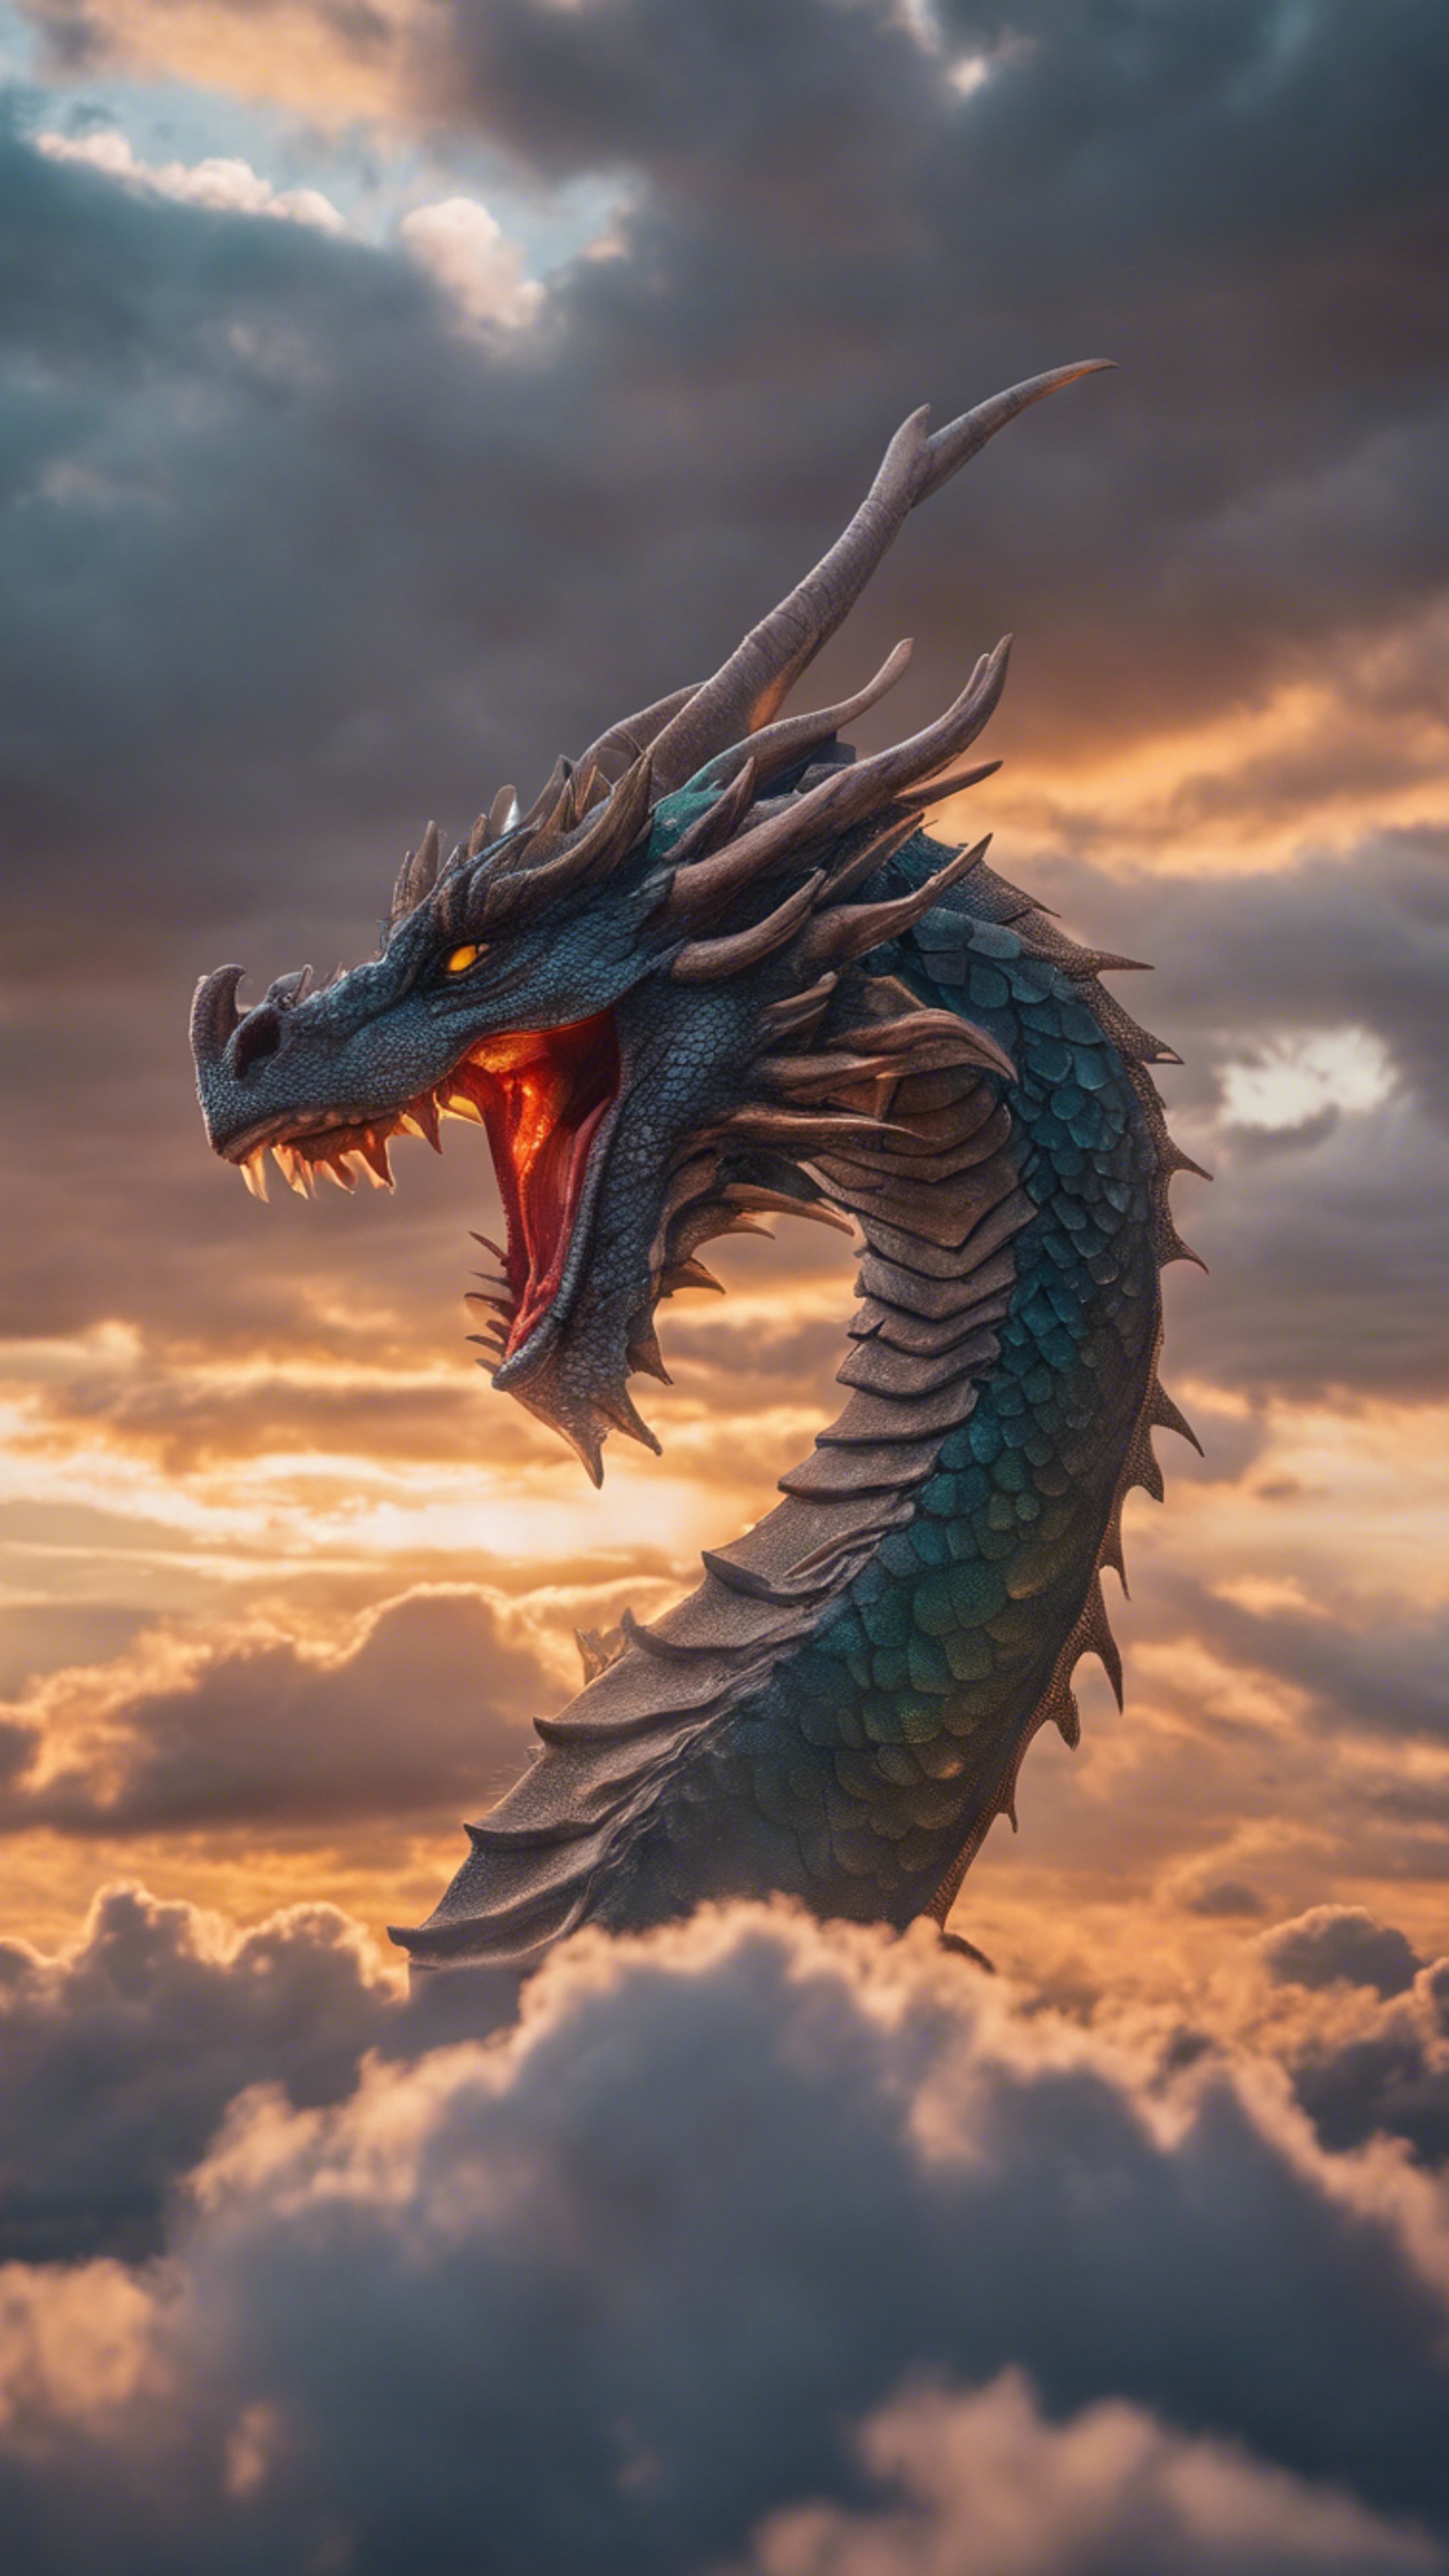 A dragon of pure light breaking through the clouds as the sun sets, its scales reflecting the vibrant colors of dusk. Tapeta[43b0d43f7e0c44e88acd]